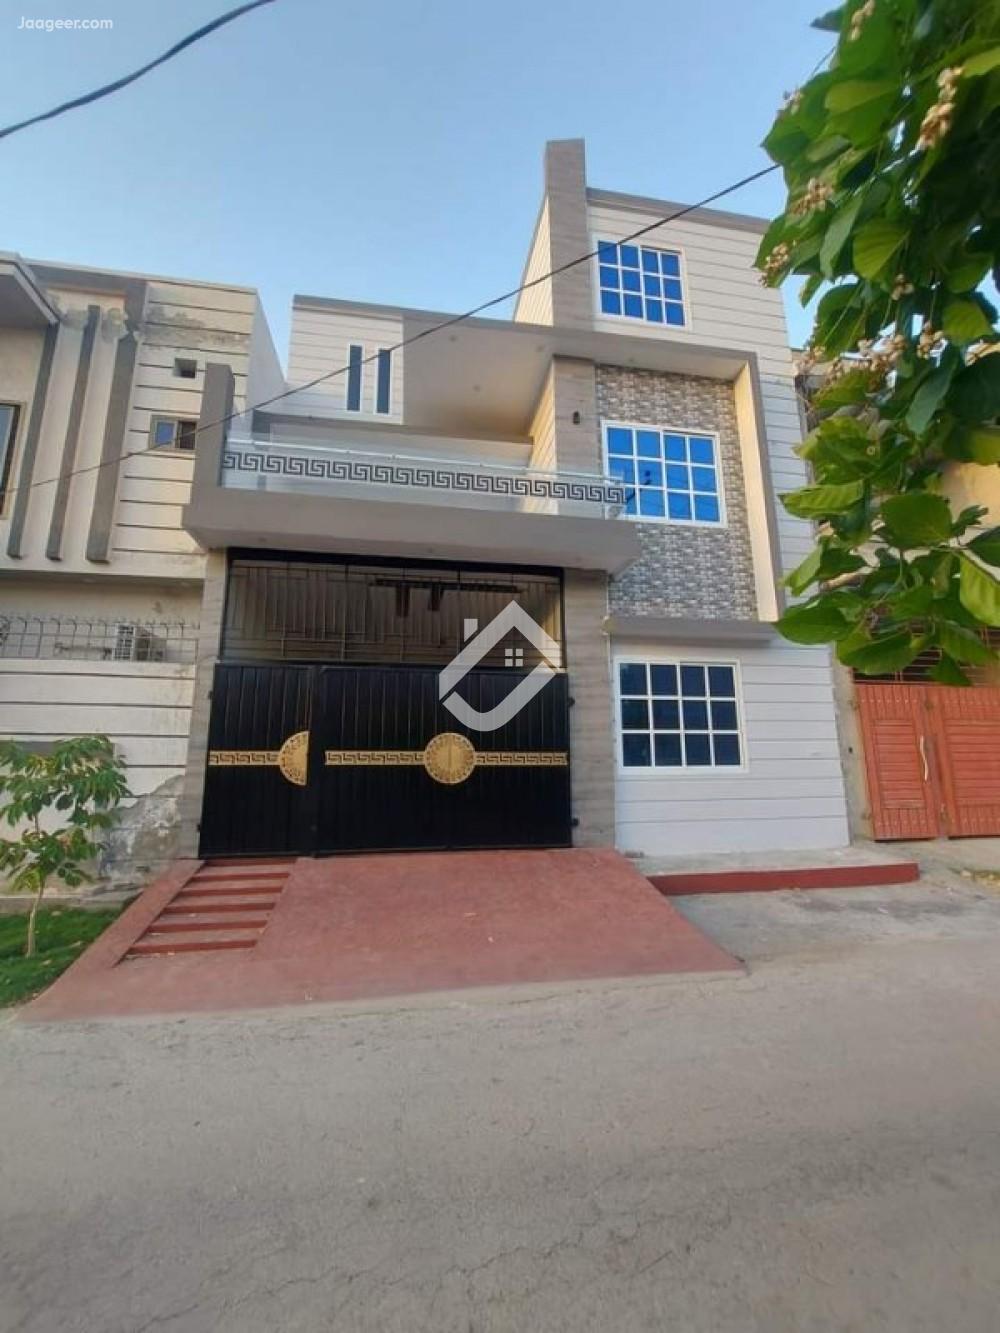 Main image 5 Marla Stylish Double Storey House Is For Sale In Canal Gardens Canal Gardens, Rahim Yar Khan